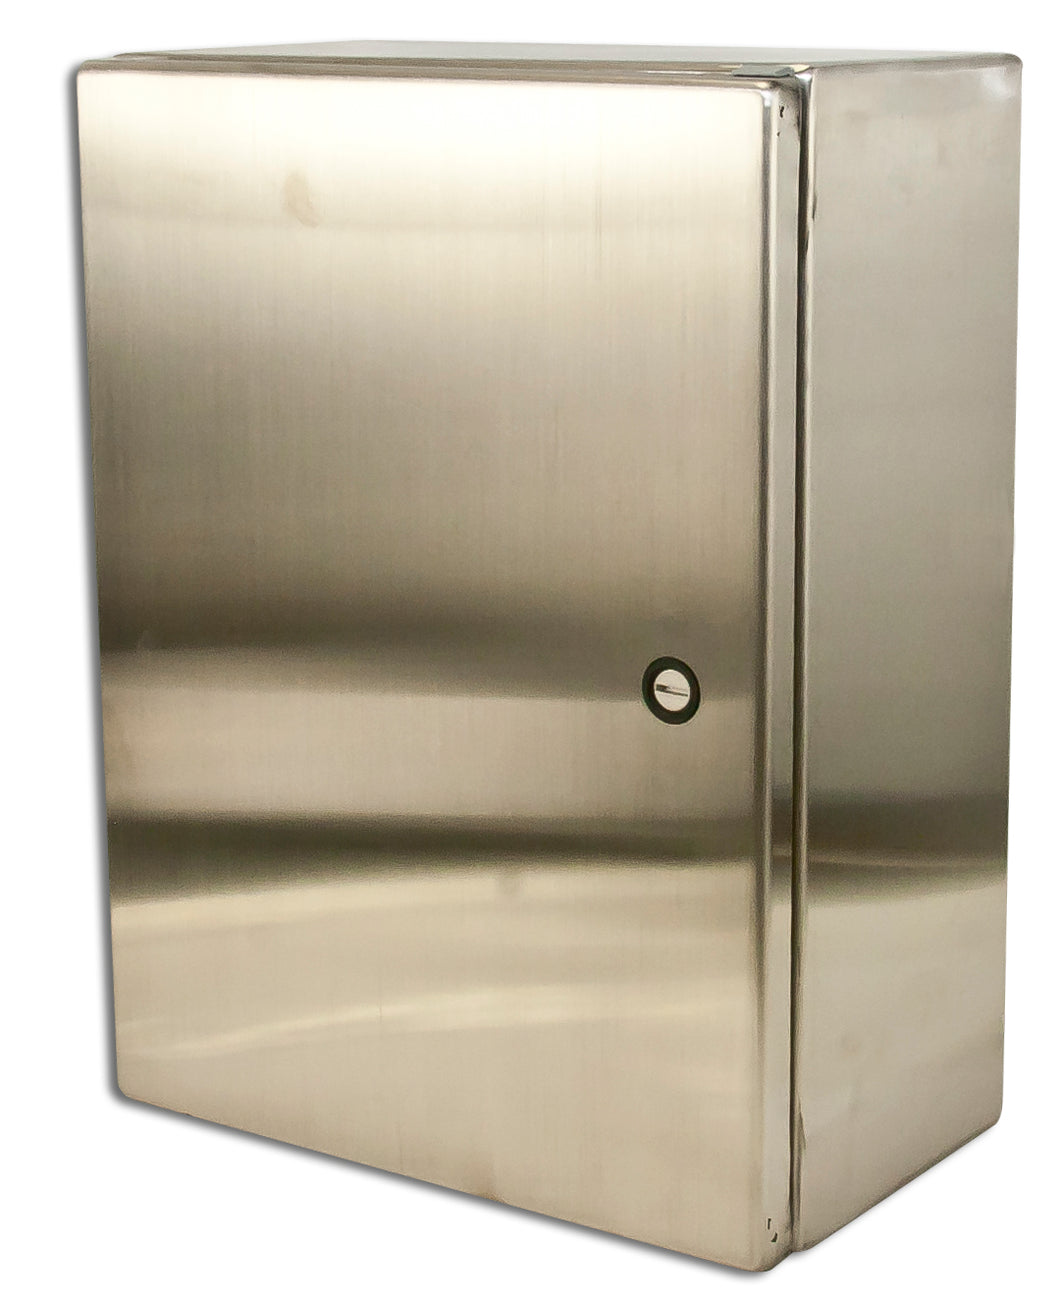 nVent Hoffman CSD24248SS Enclosure, NEMA 4X, Hinged Cover, Stainless Steel, 24